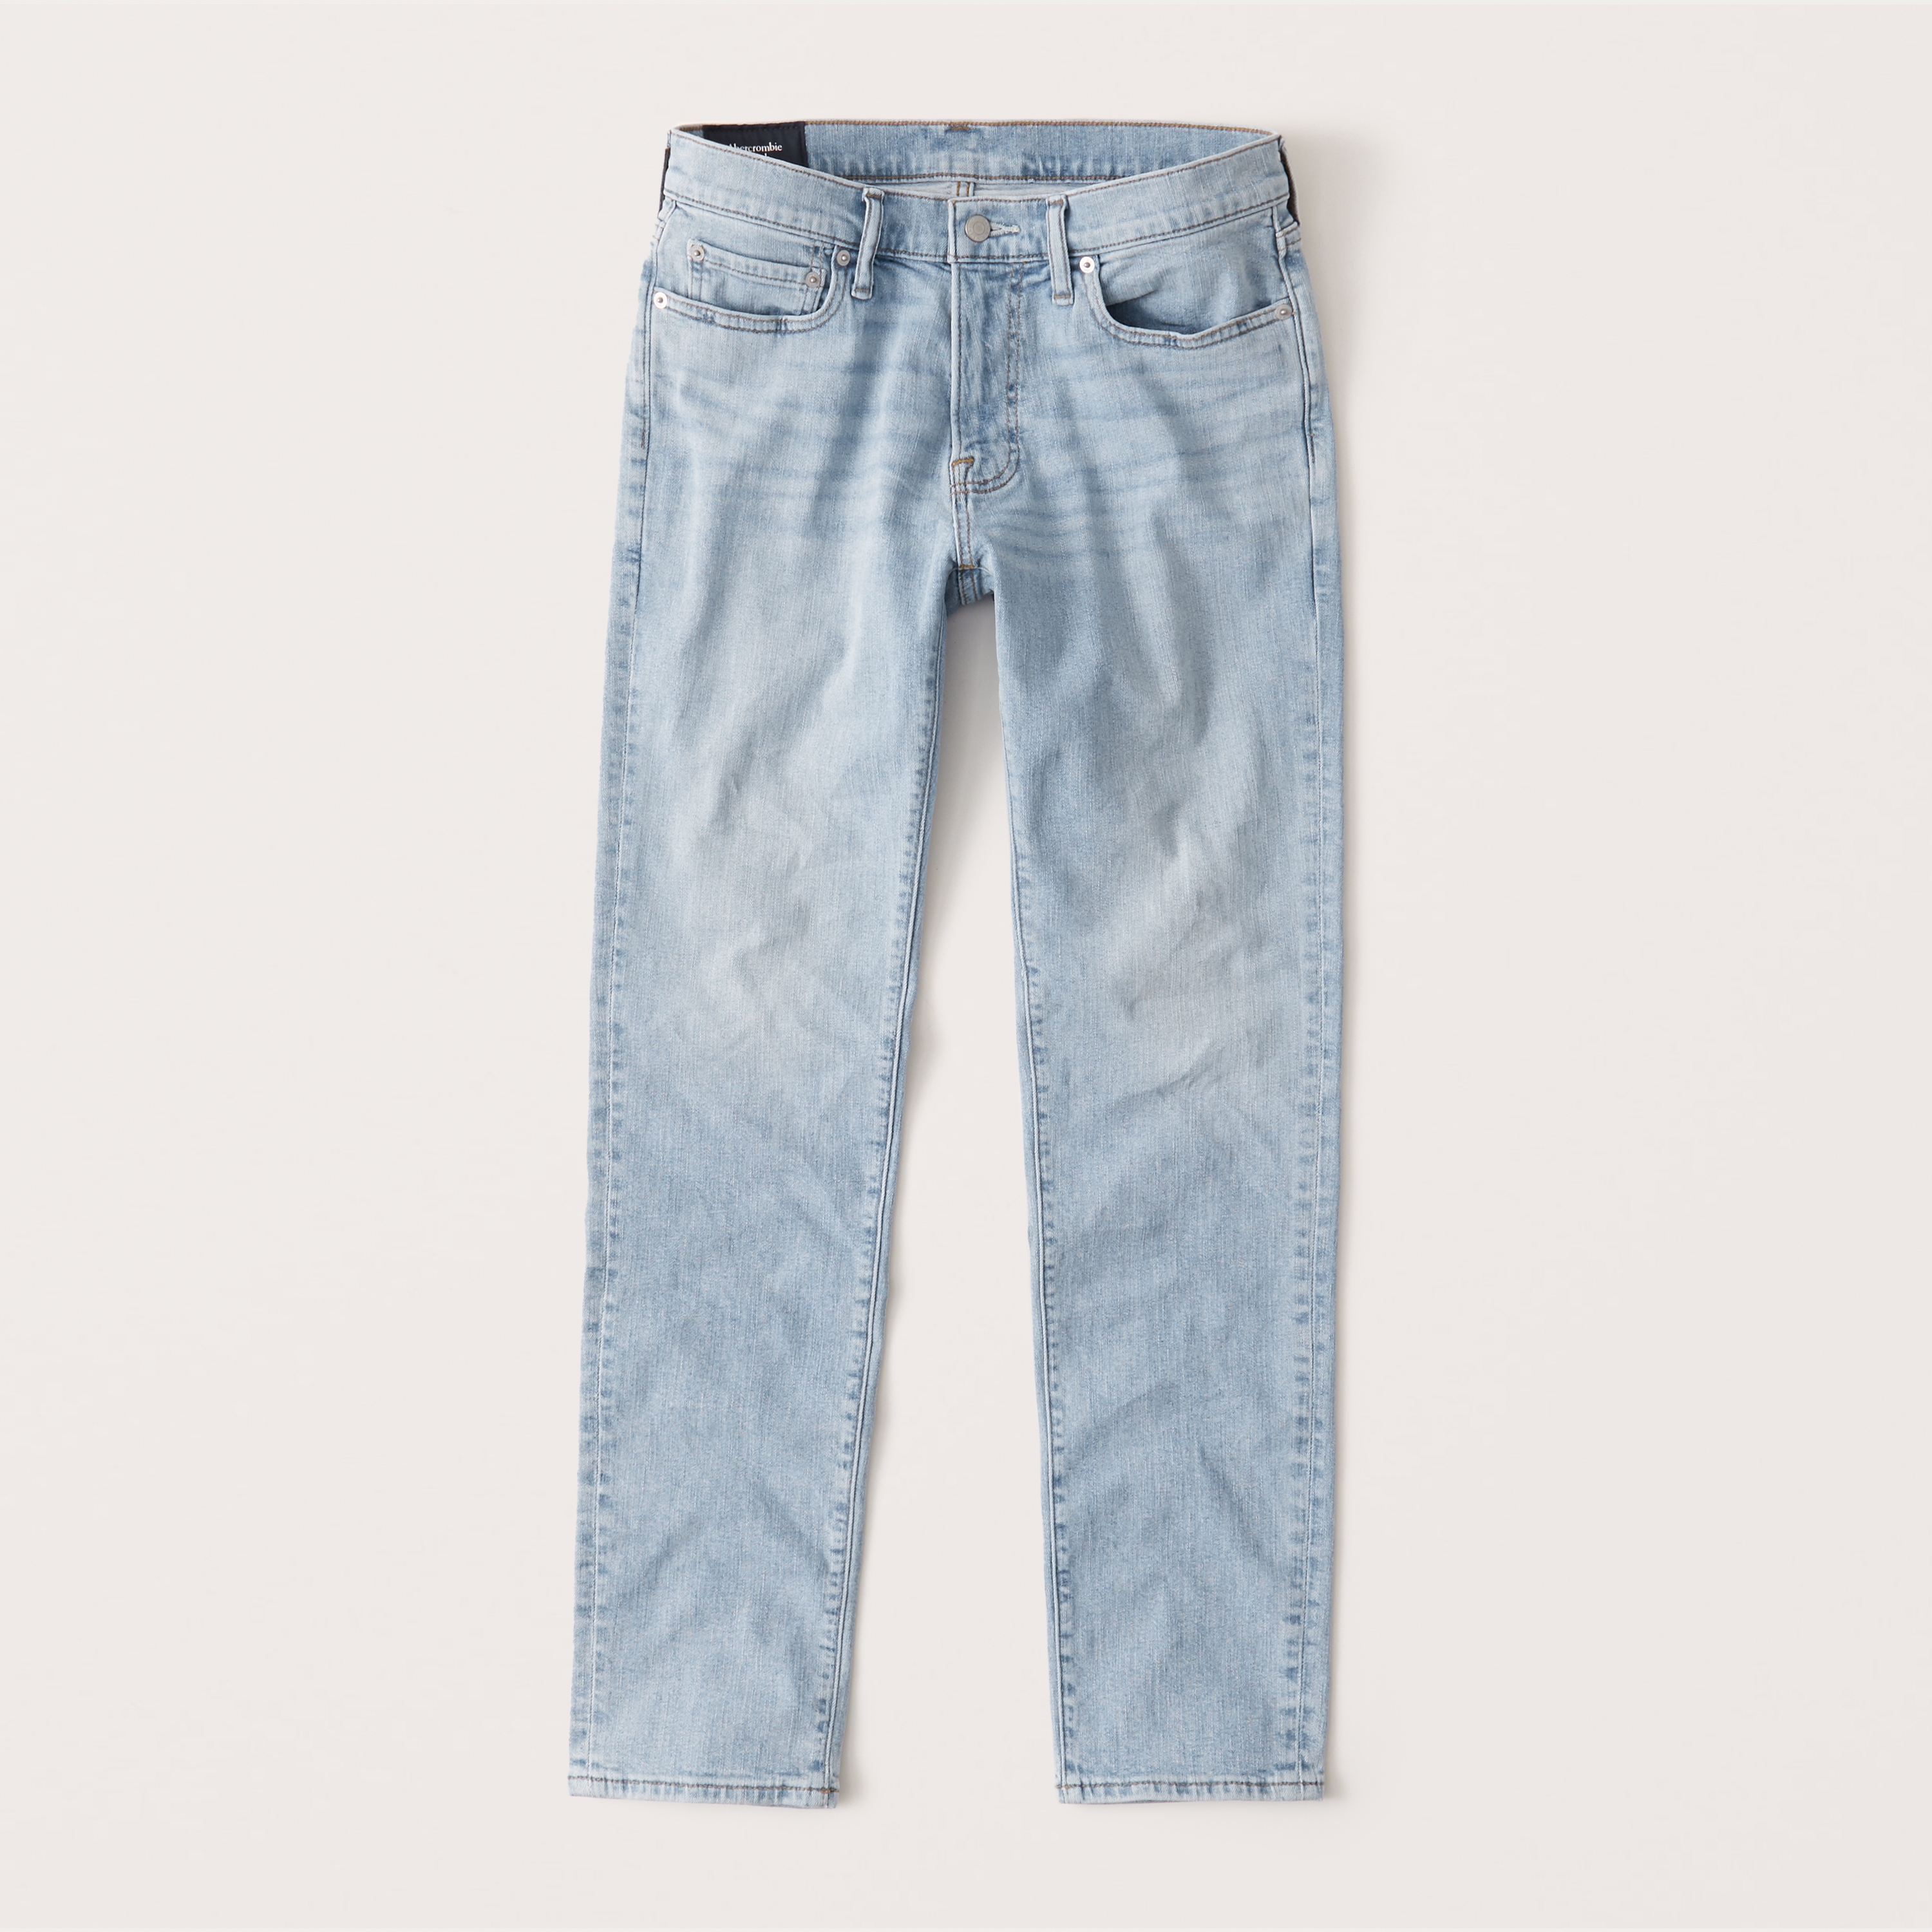 abercrombie and fitch pants price